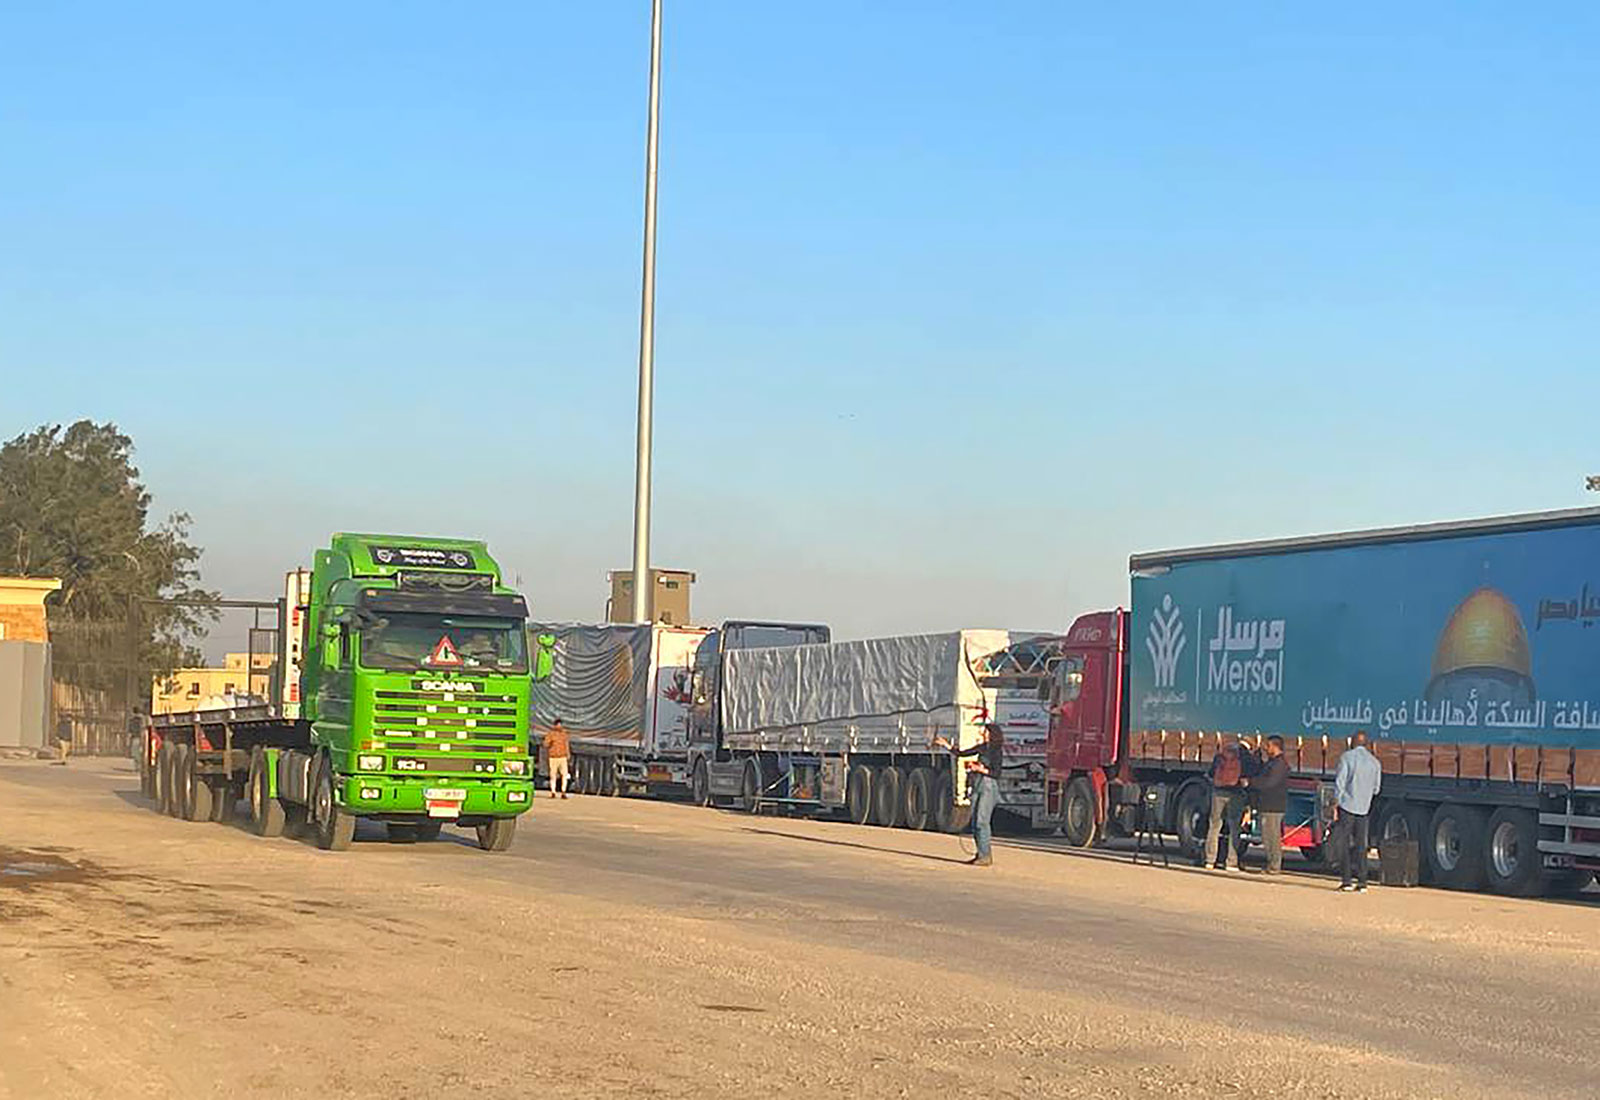 Trucks loaded with humanitarian aid wait for entry into Gaza from the Rafah border crossing in Egypt on Thursday, November 30.